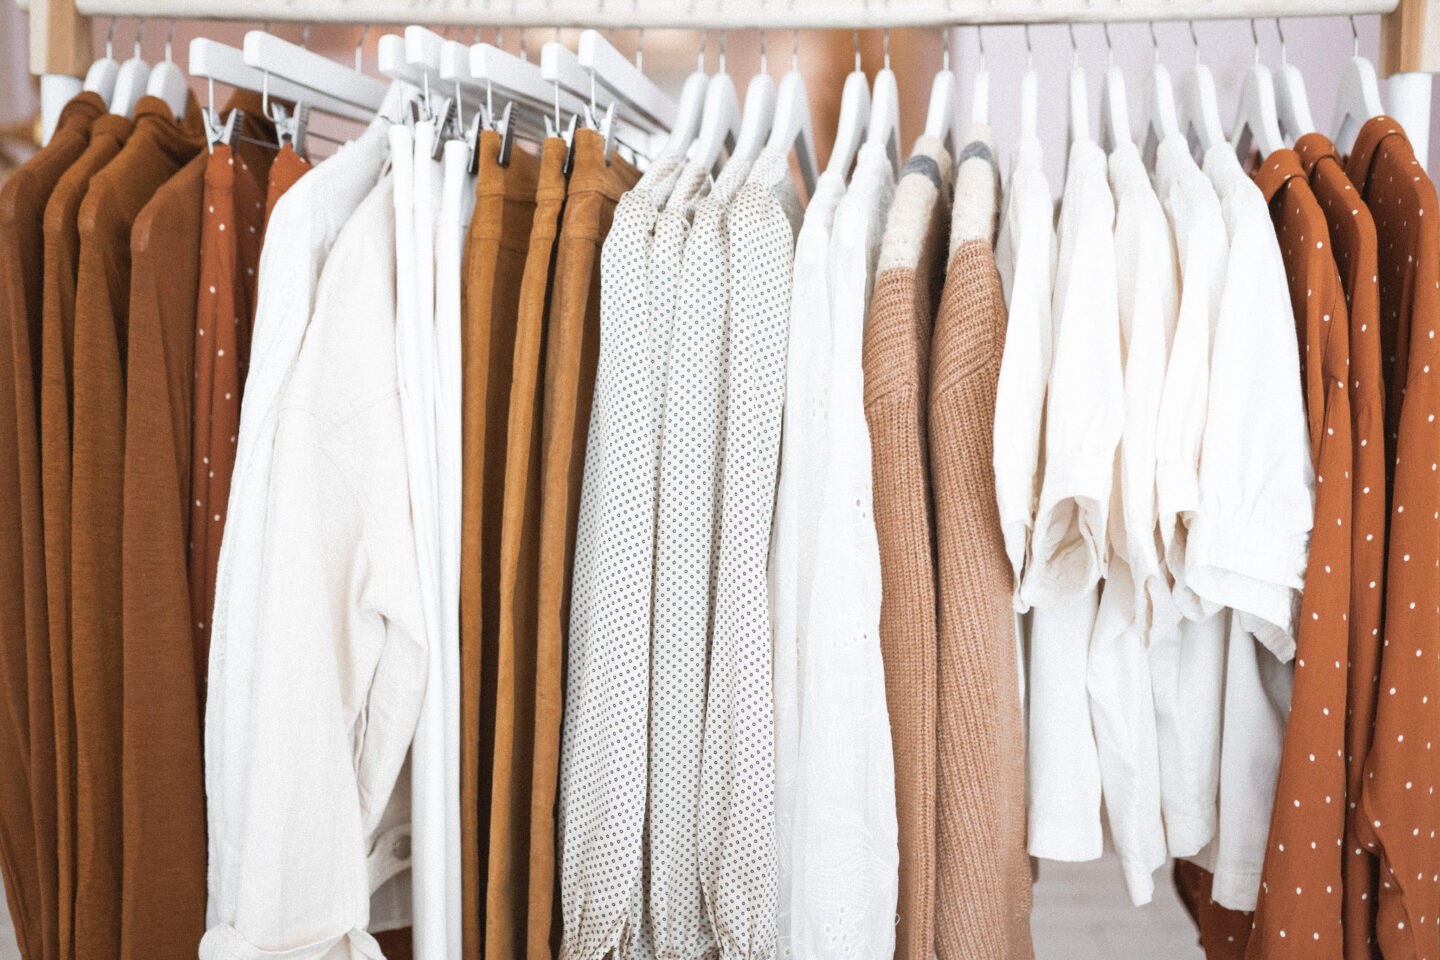 Warm tones, tops and pants hanging on a clothing rack